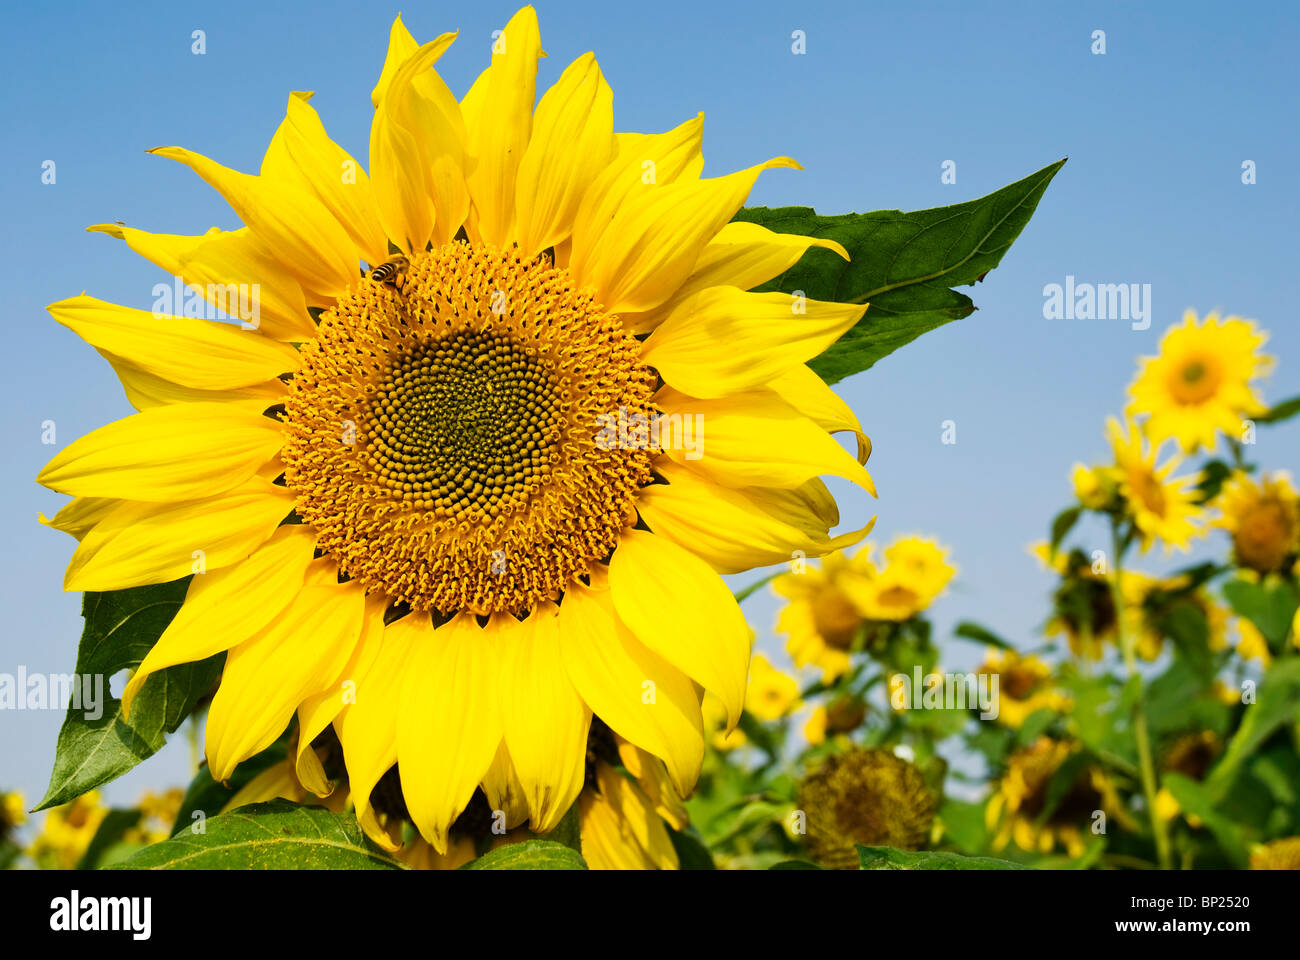 Big sunflower with flying bee under blue sky Stock Photo